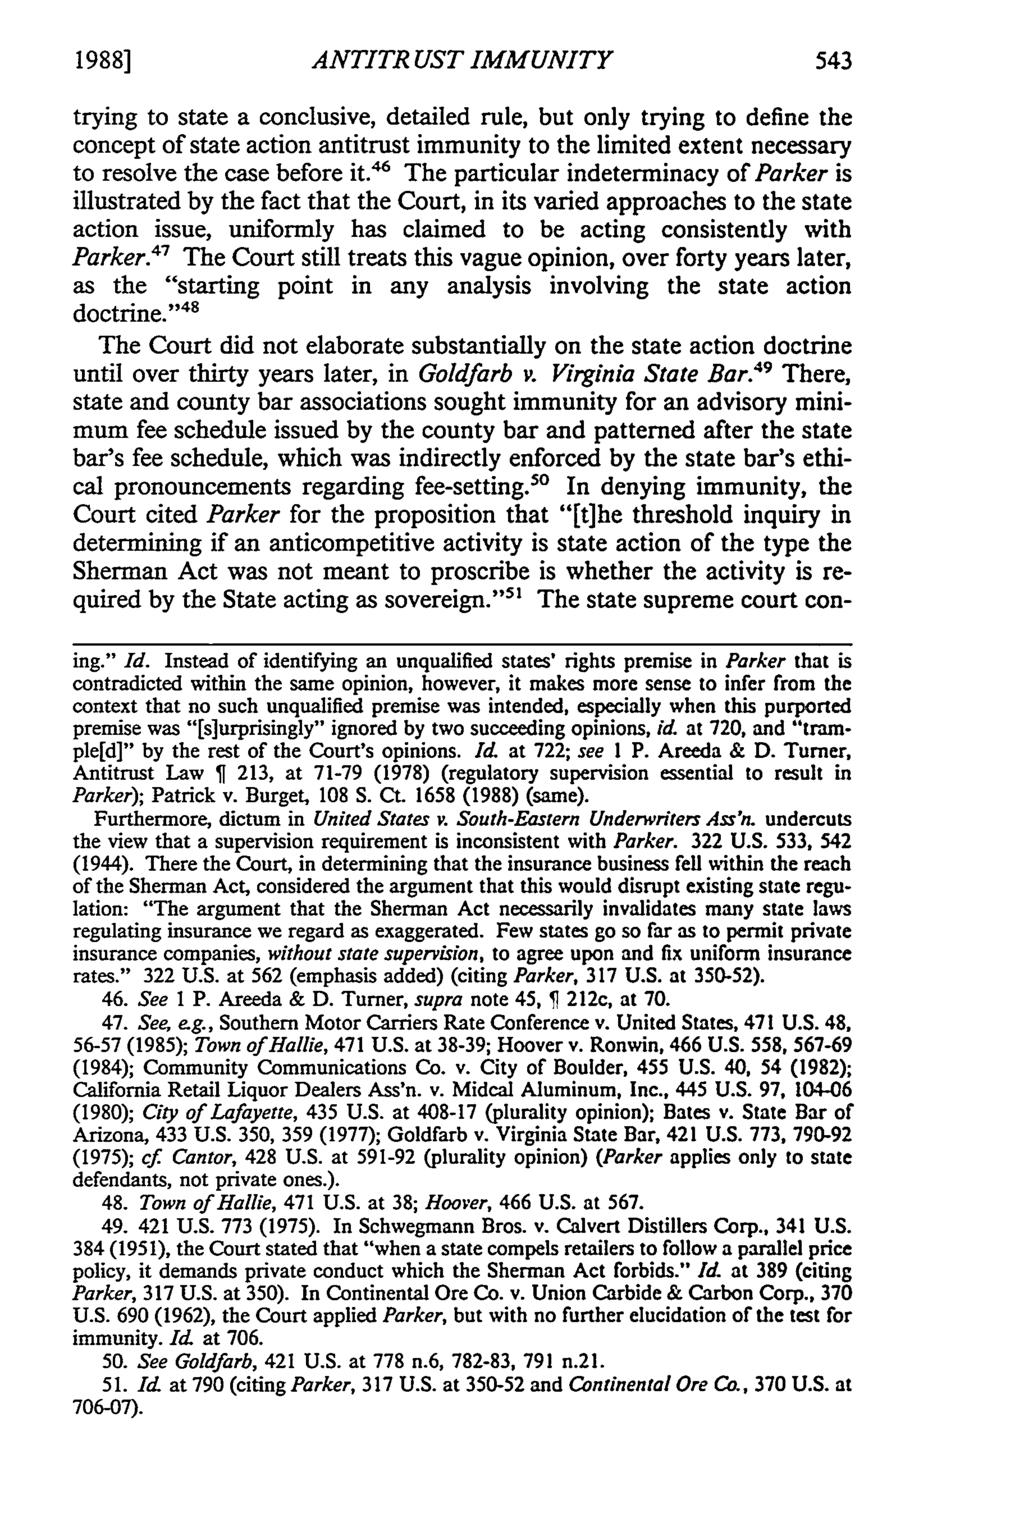 1988] ANTITR UST IMMUNITY trying to state a conclusive, detailed rule, but only trying to define the concept of state action antitrust immunity to the limited extent necessary to resolve the case